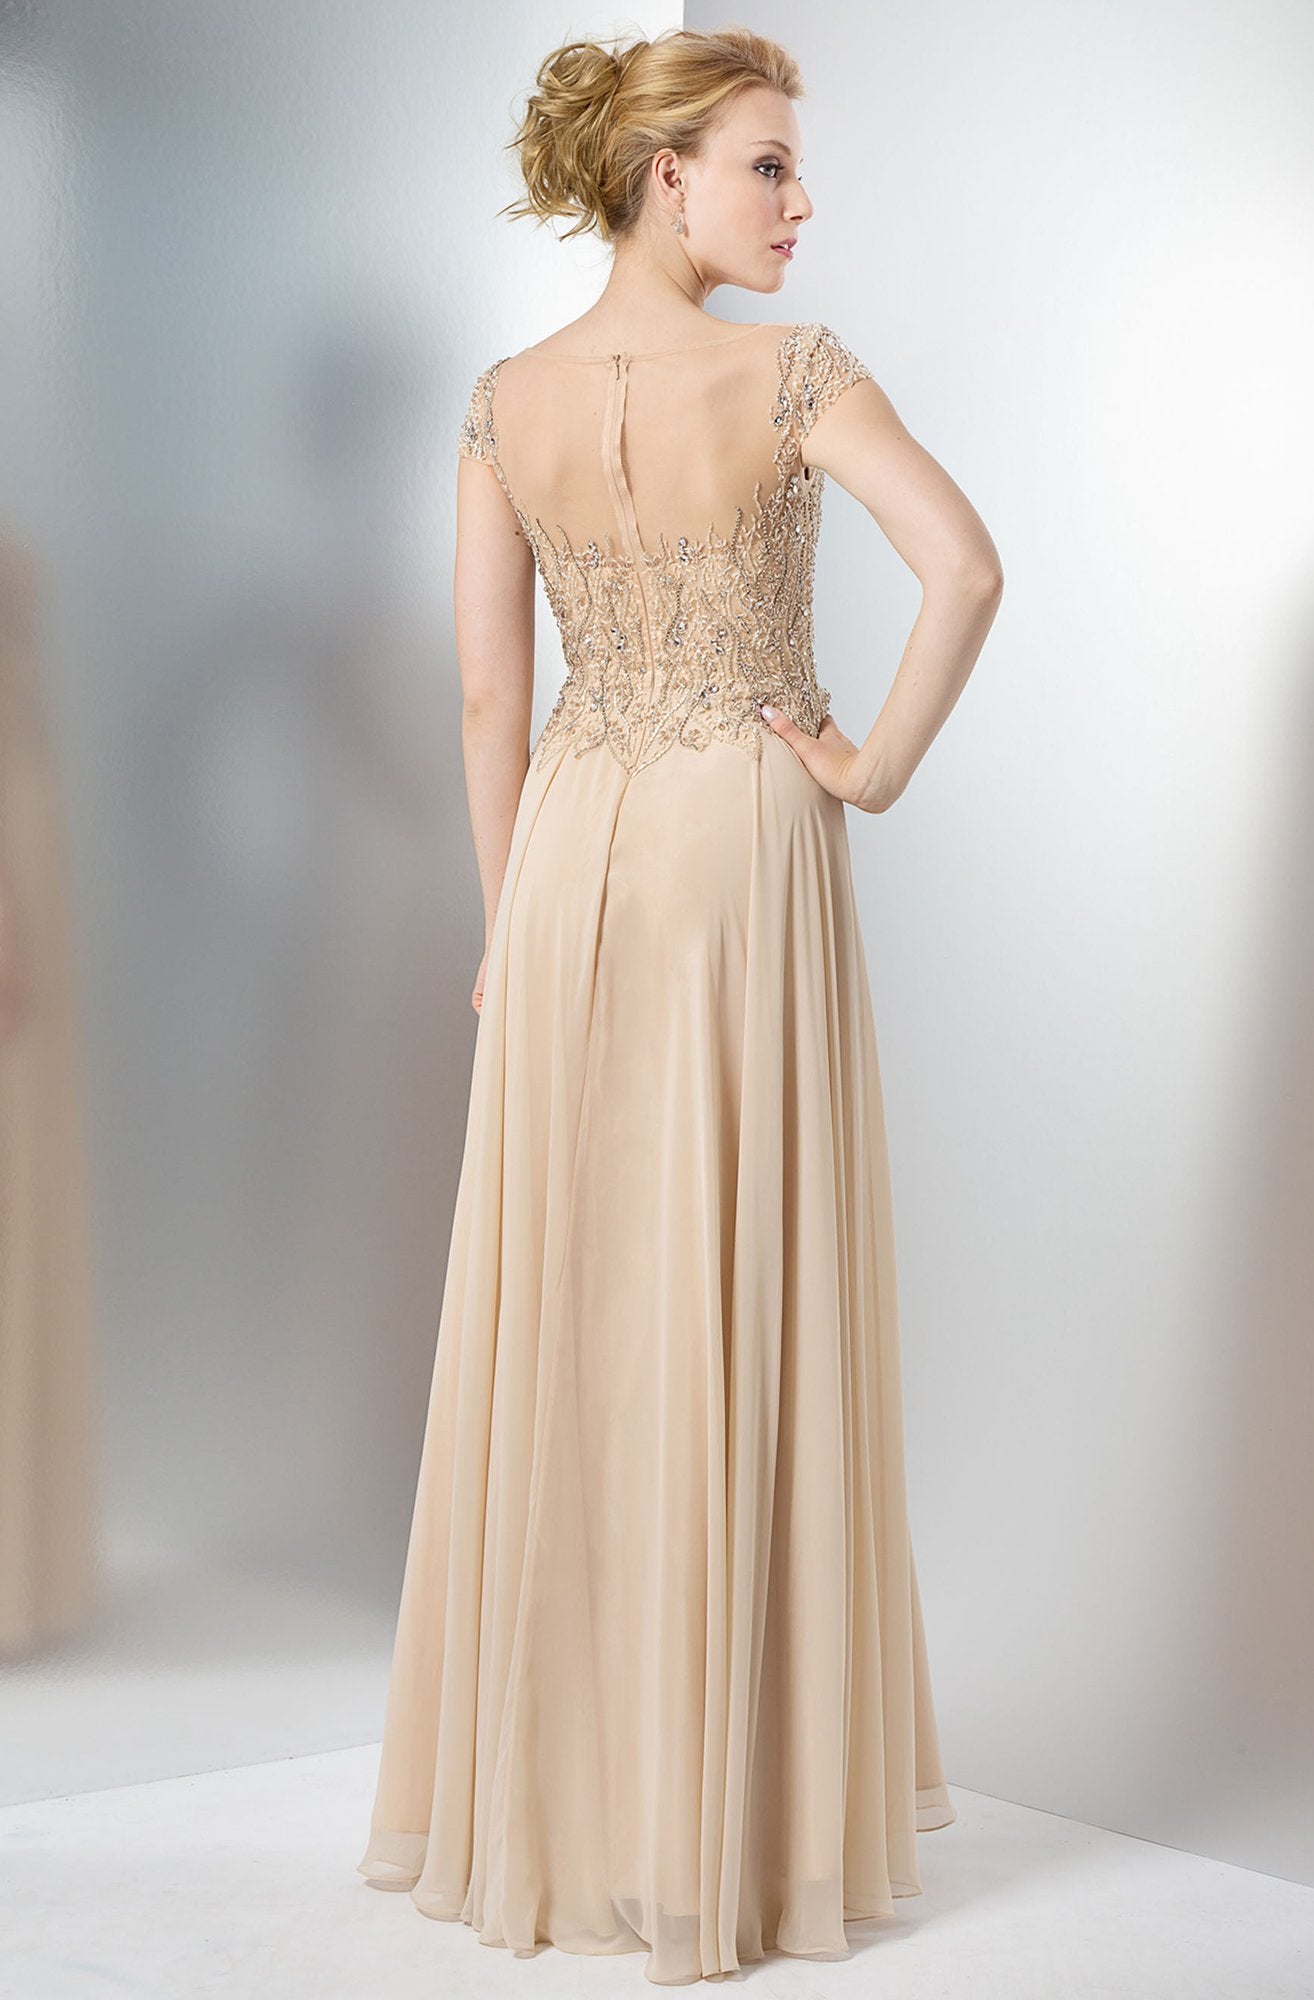 Marsoni by Colors - Cap Sleeve Beaded Illusion Chiffon Long Dress M108  In Nude